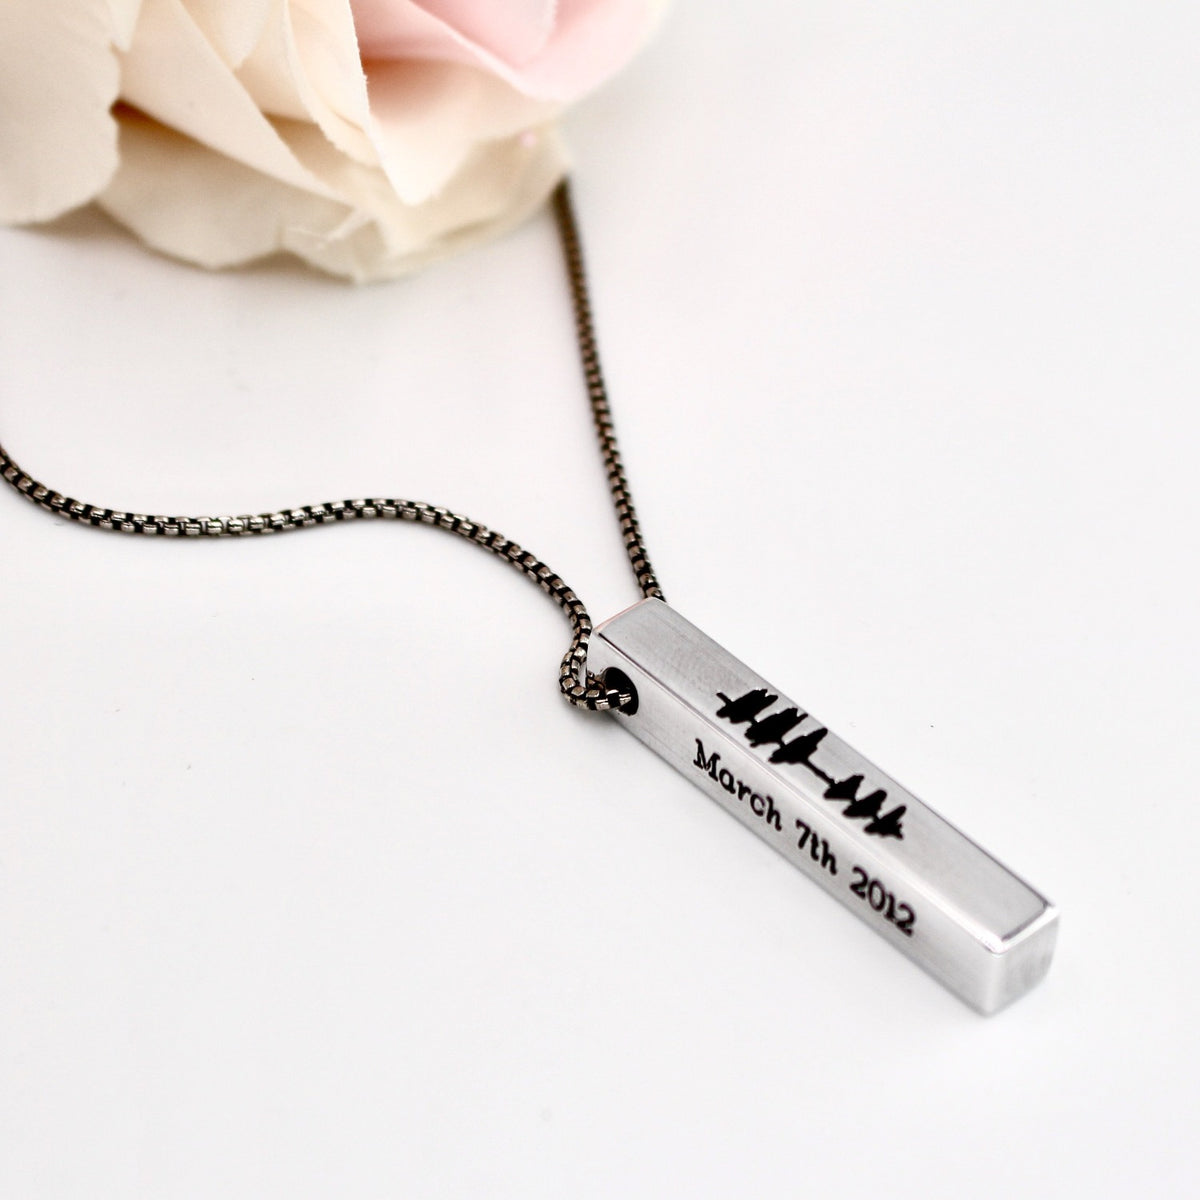 Sound Wave Vertical Bar Necklace - Silver Tone - Love It Personalized